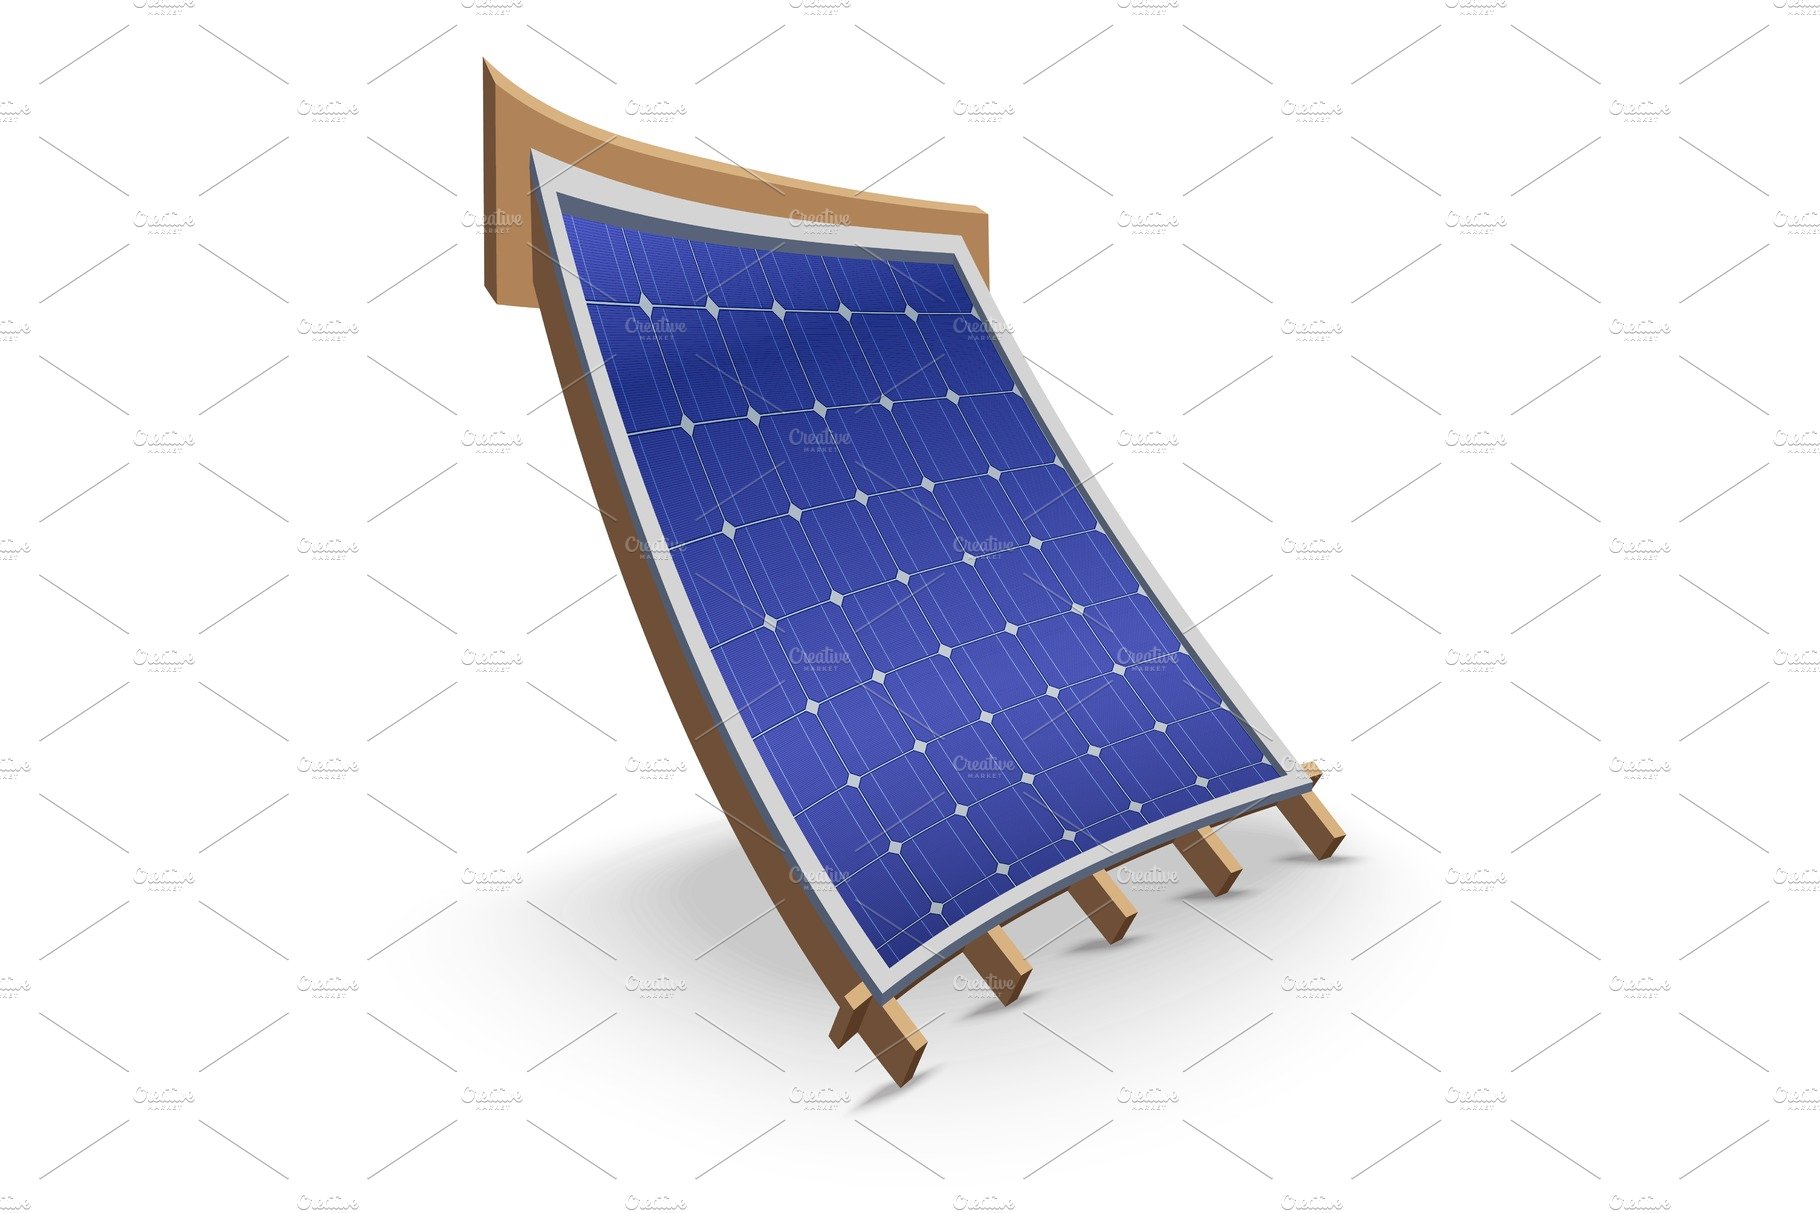 Concept Solar Panel Cover on Roof cover image.